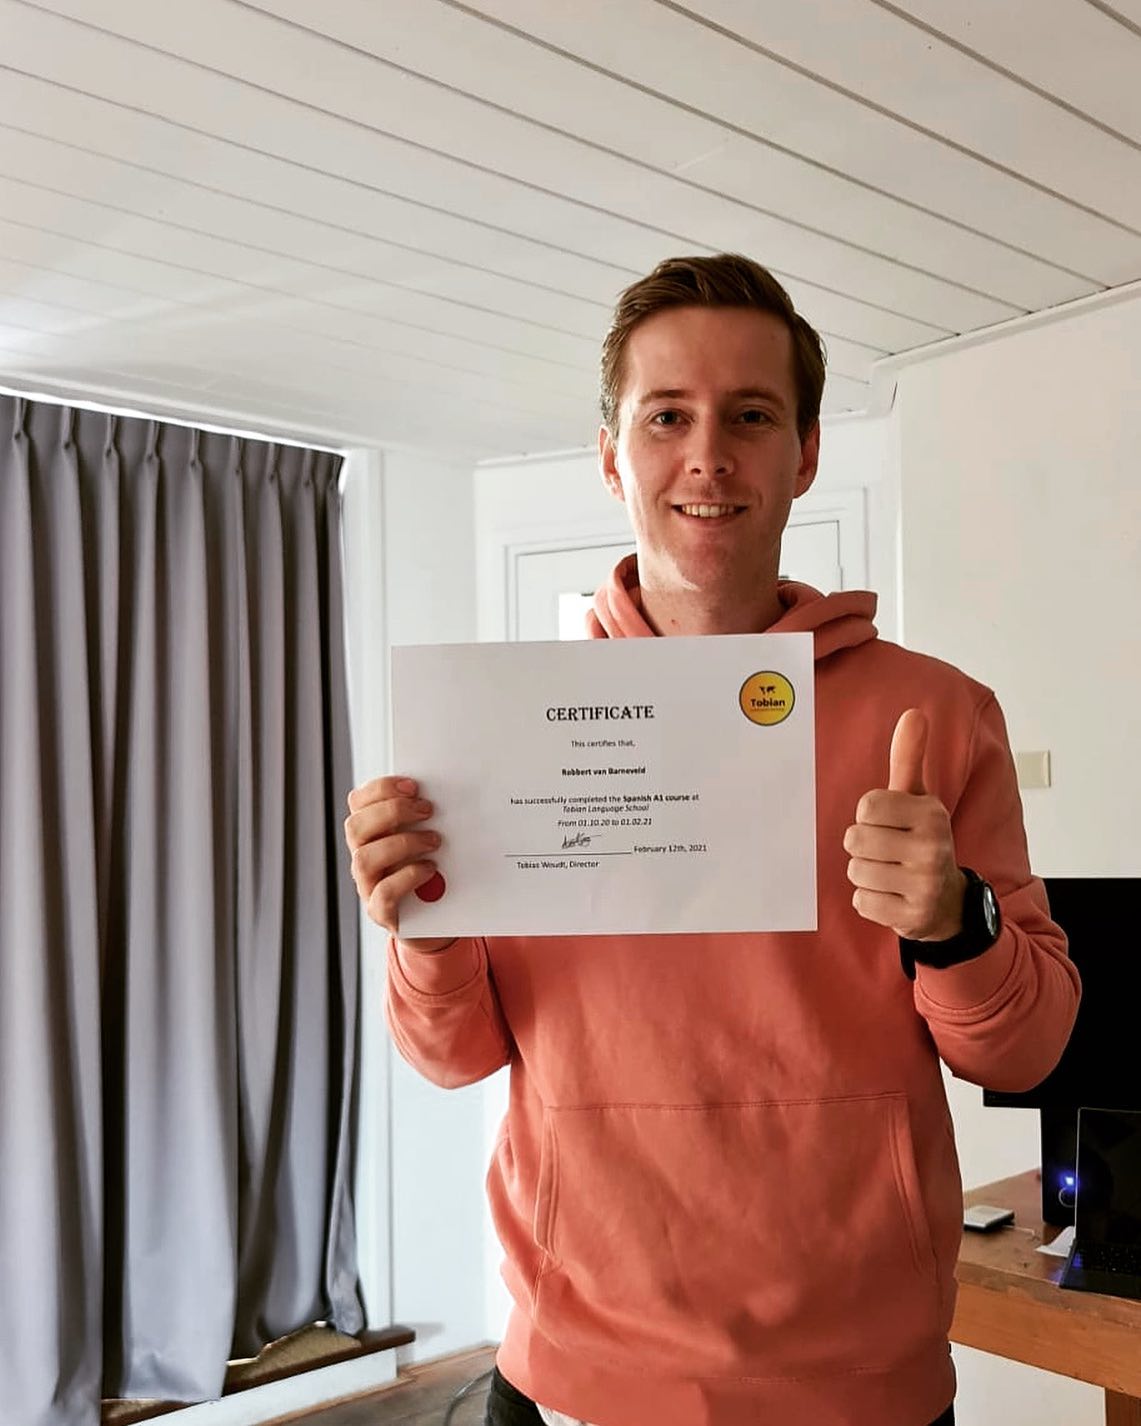 Robert has successfully completed learning Spanish with Tobian Language School's spanish language courses.